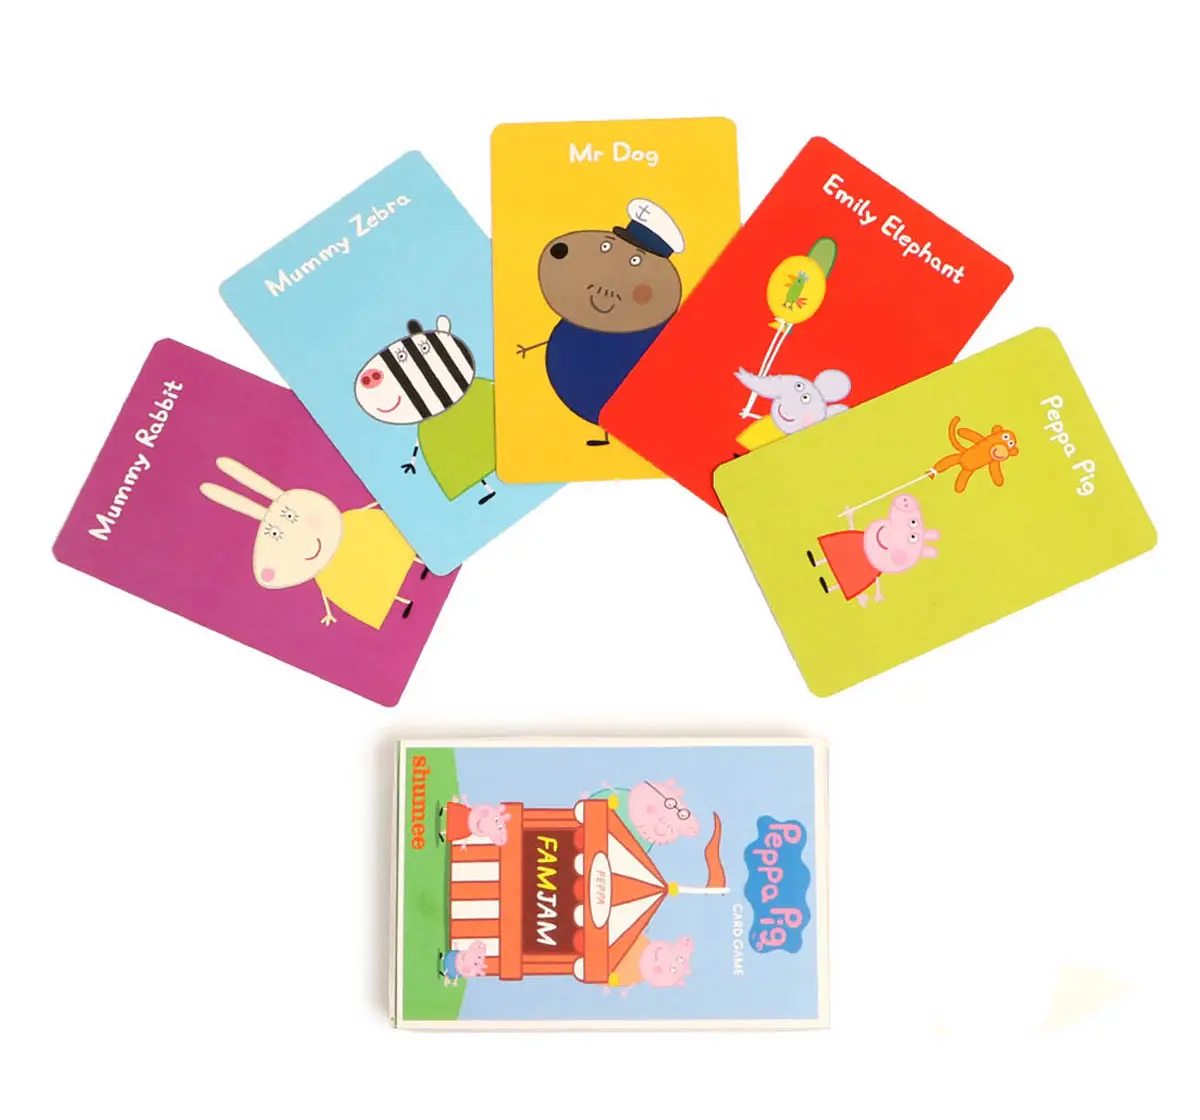 Shumee Peppa Fam Jam Flash Card Game for kids 3Y+, Multicolour